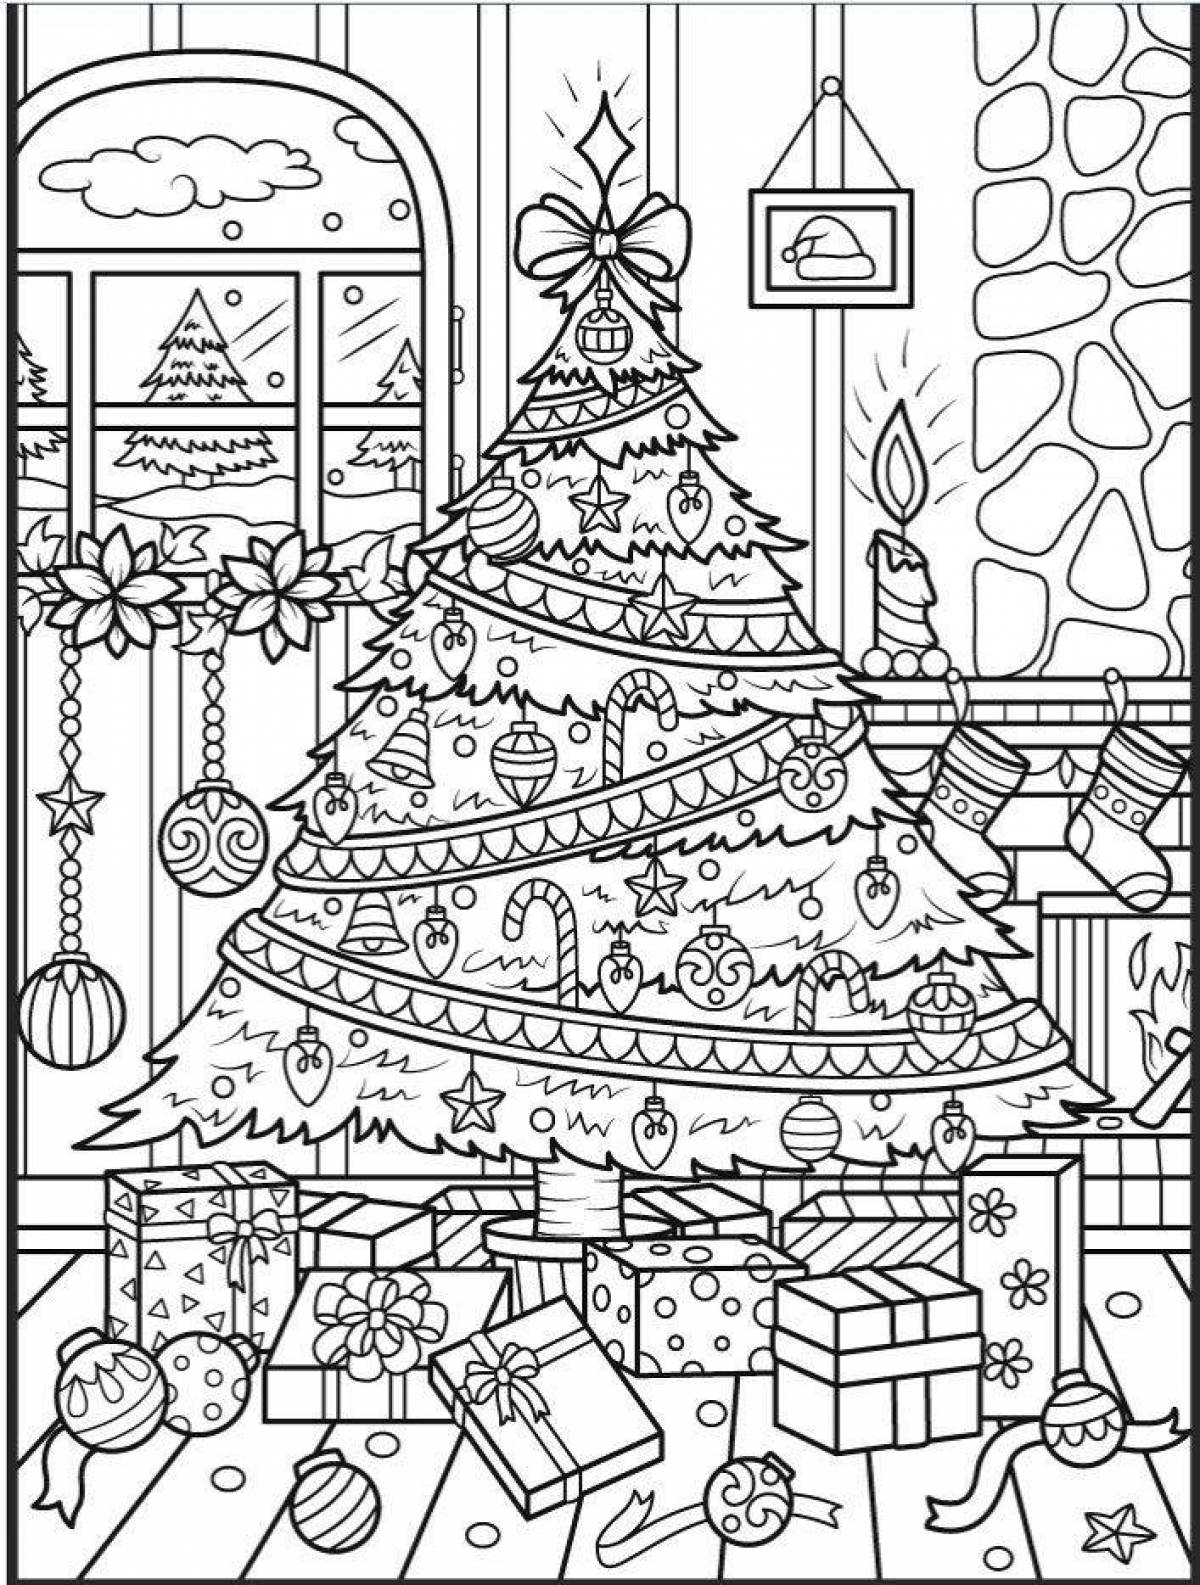 Glowing Christmas complex coloring book